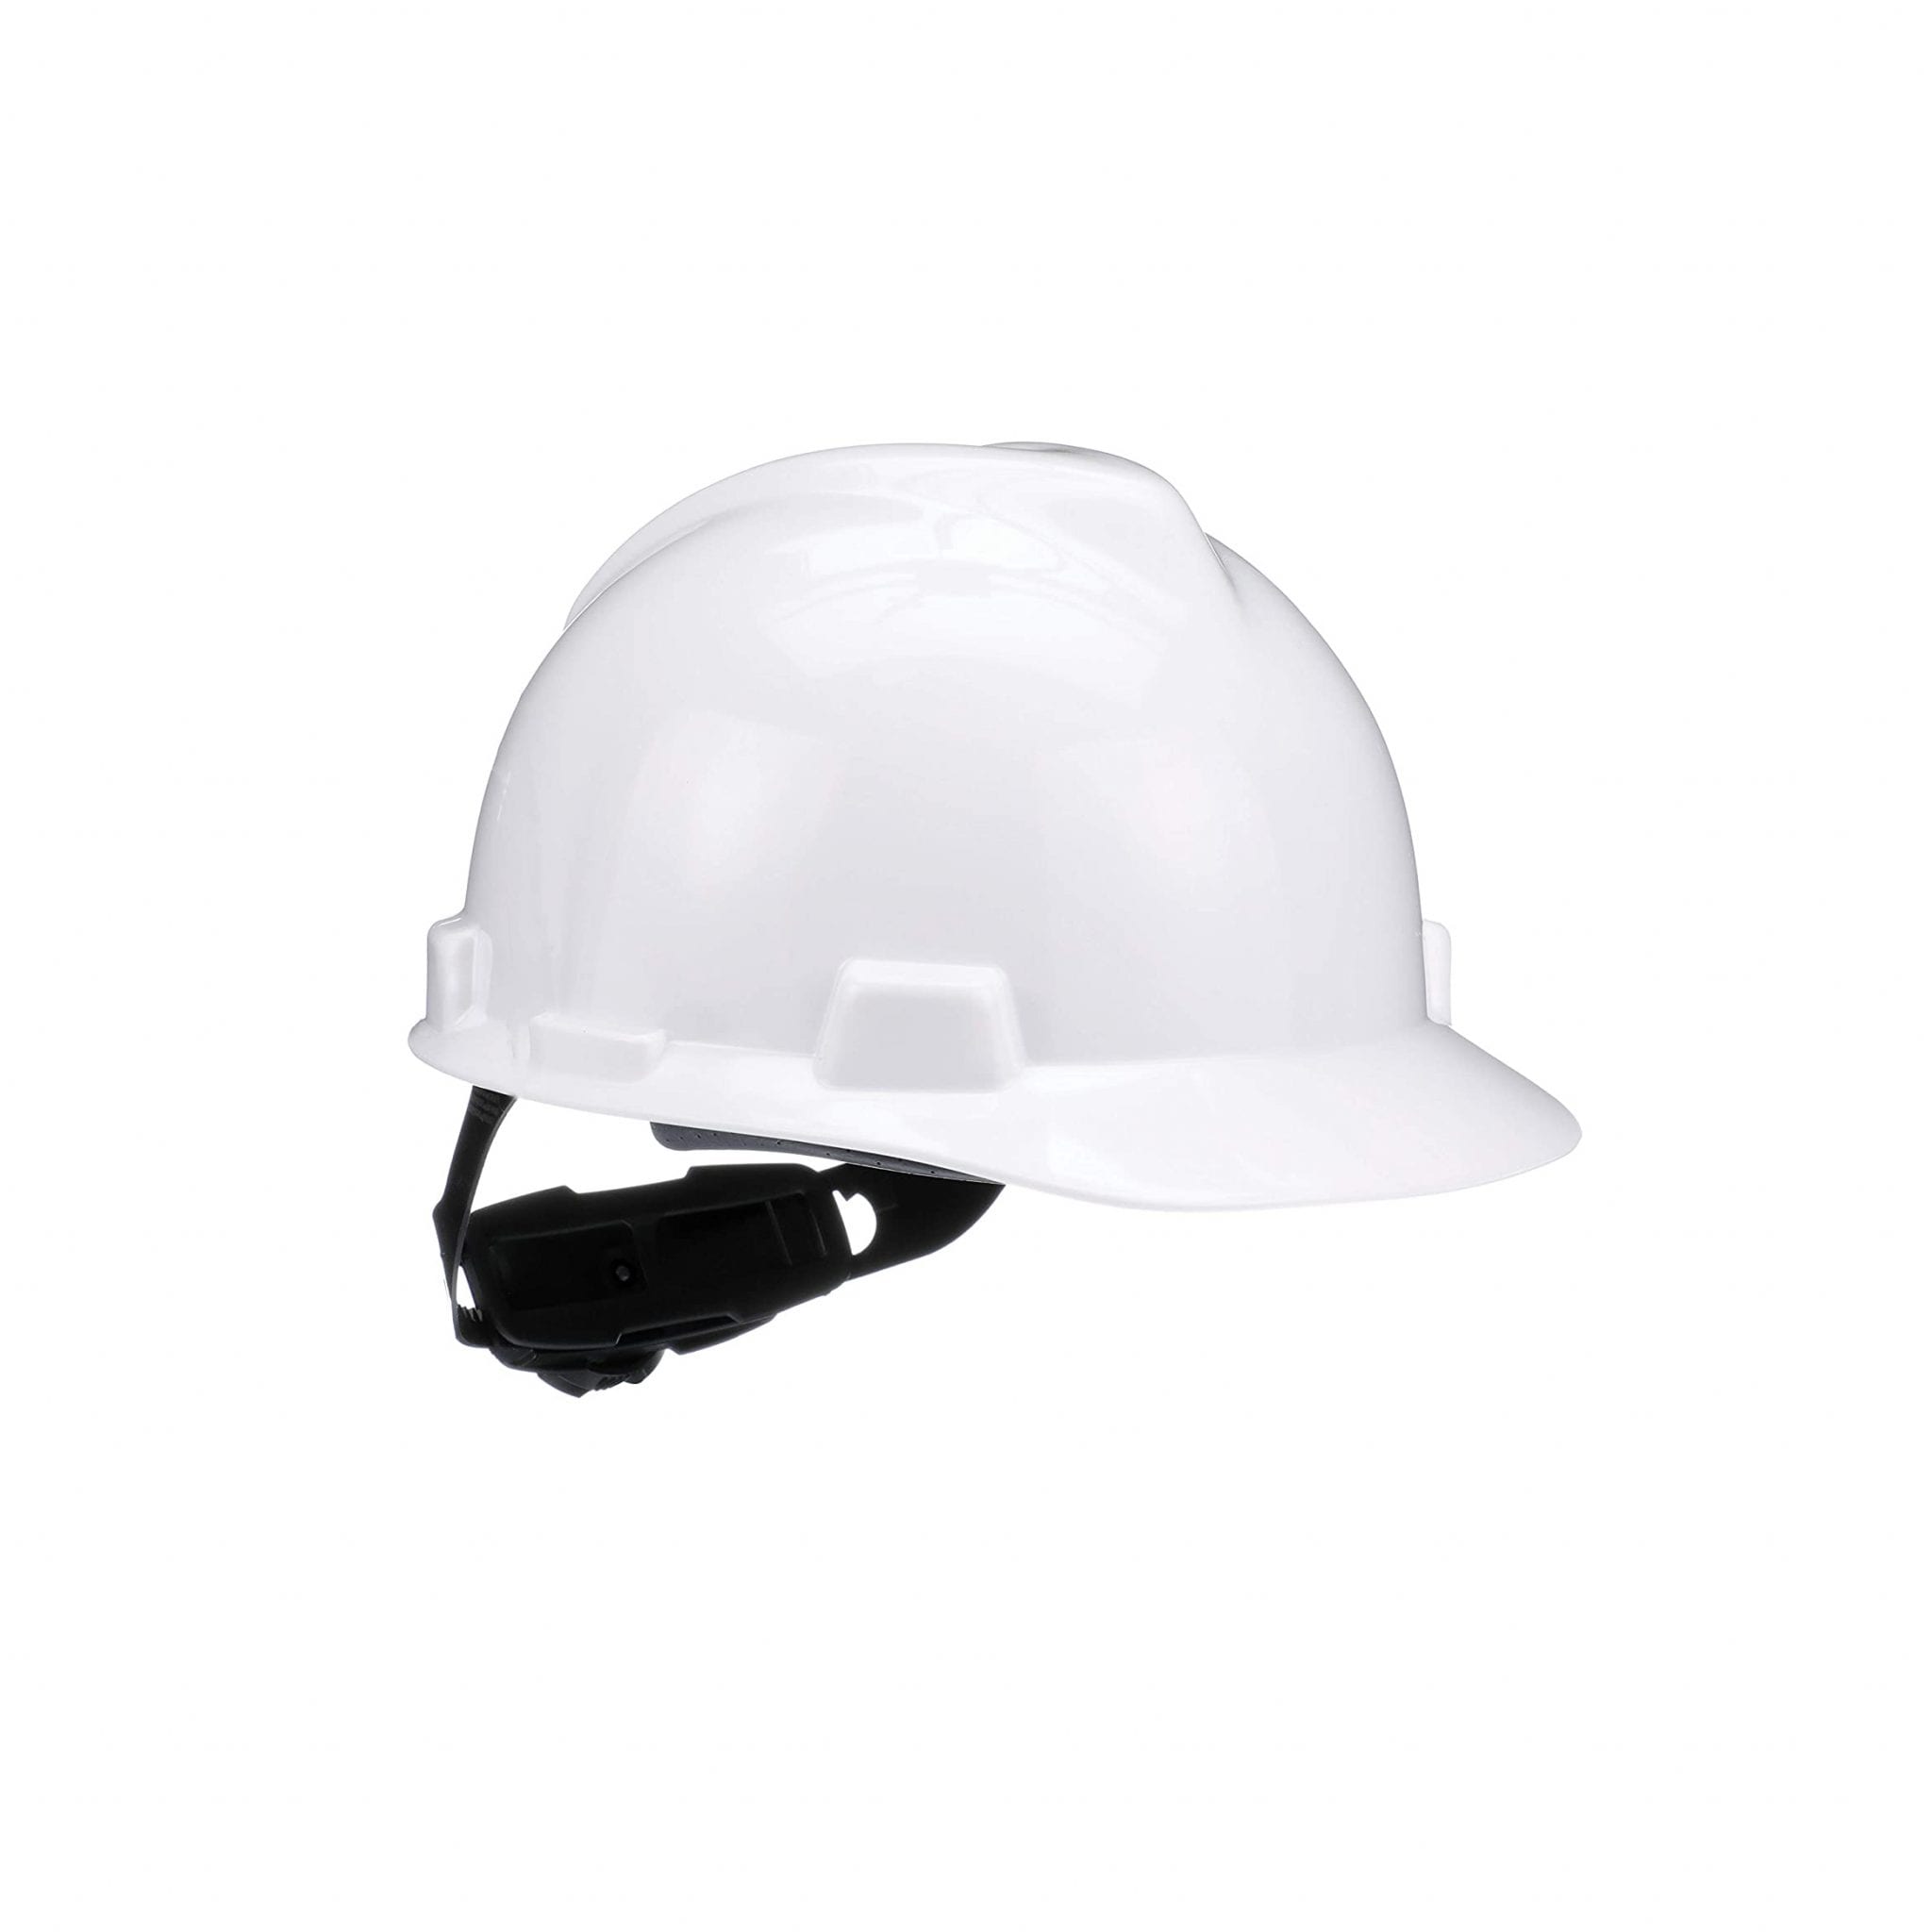 Top 10 Best Construction Hats in 2023 Reviews | Buyer’s Guide